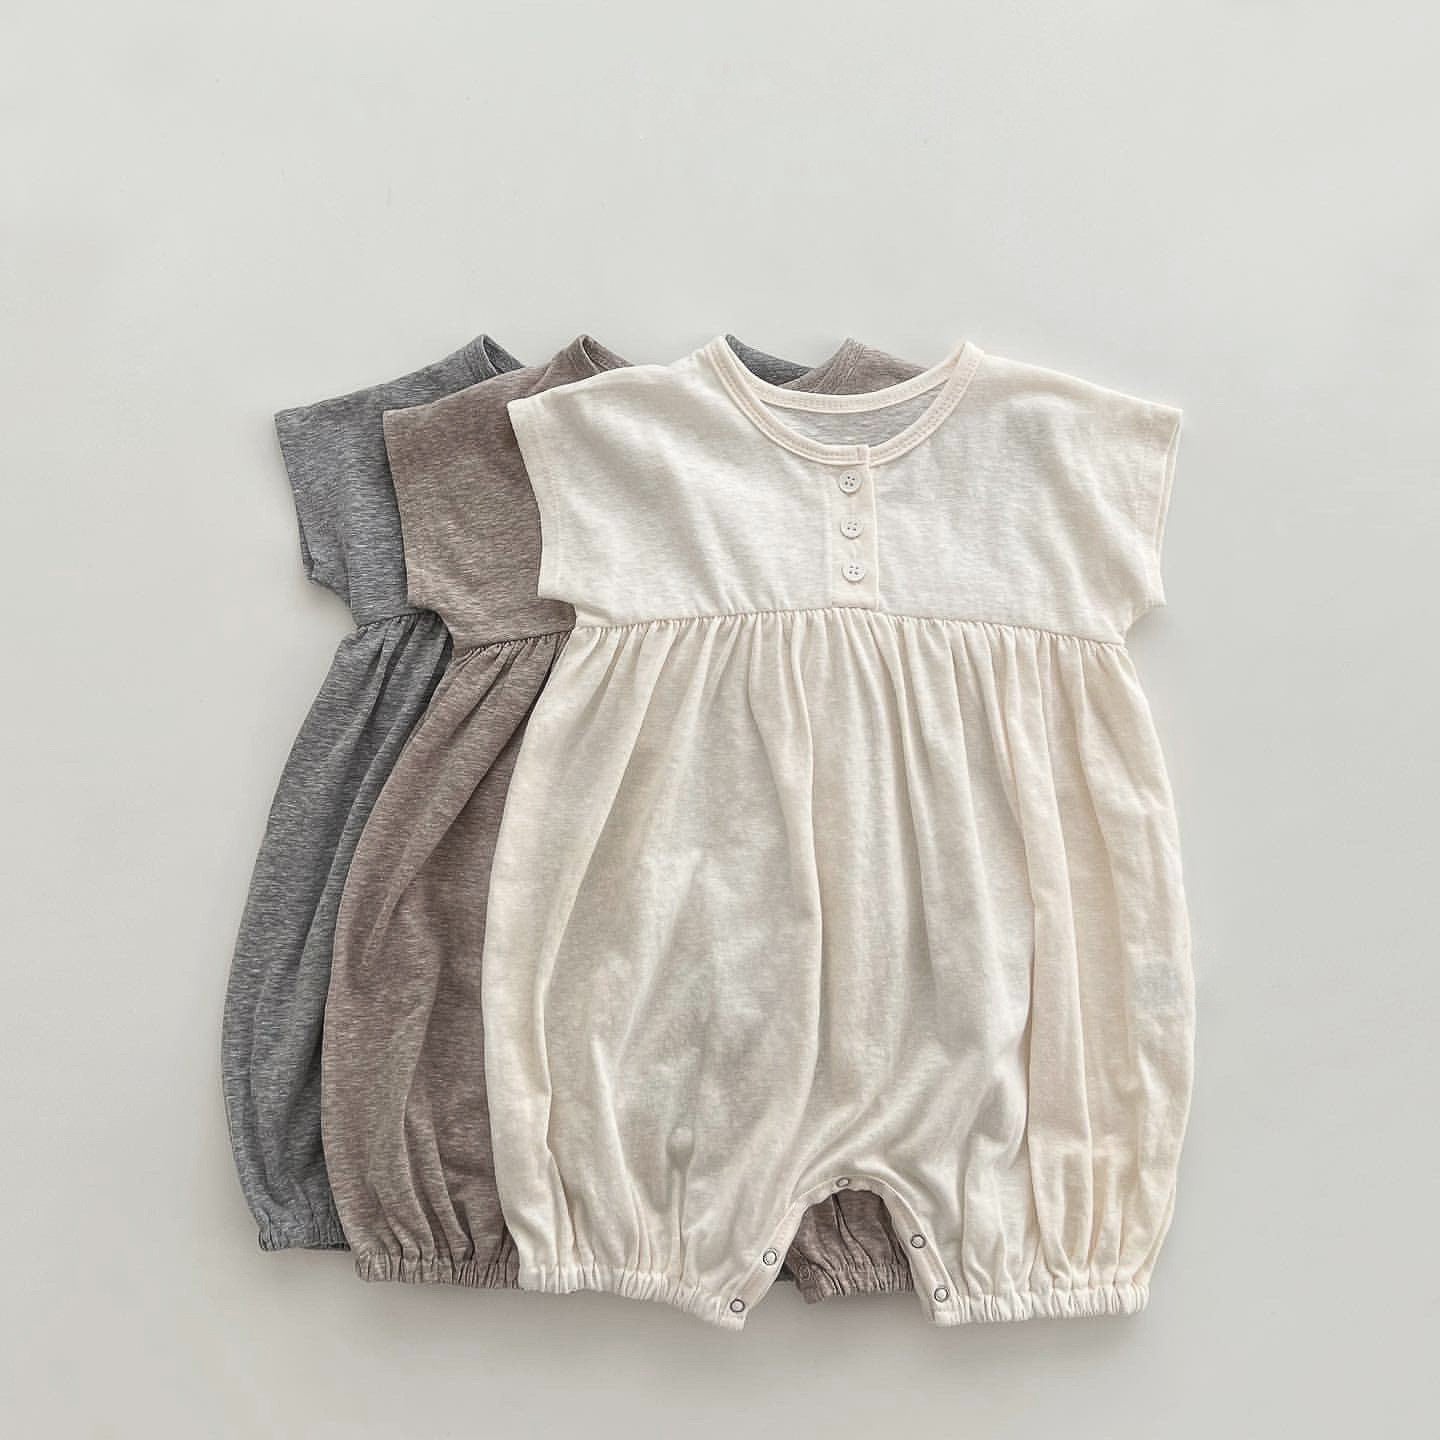 Baby Casual Short Sleeve Rompers